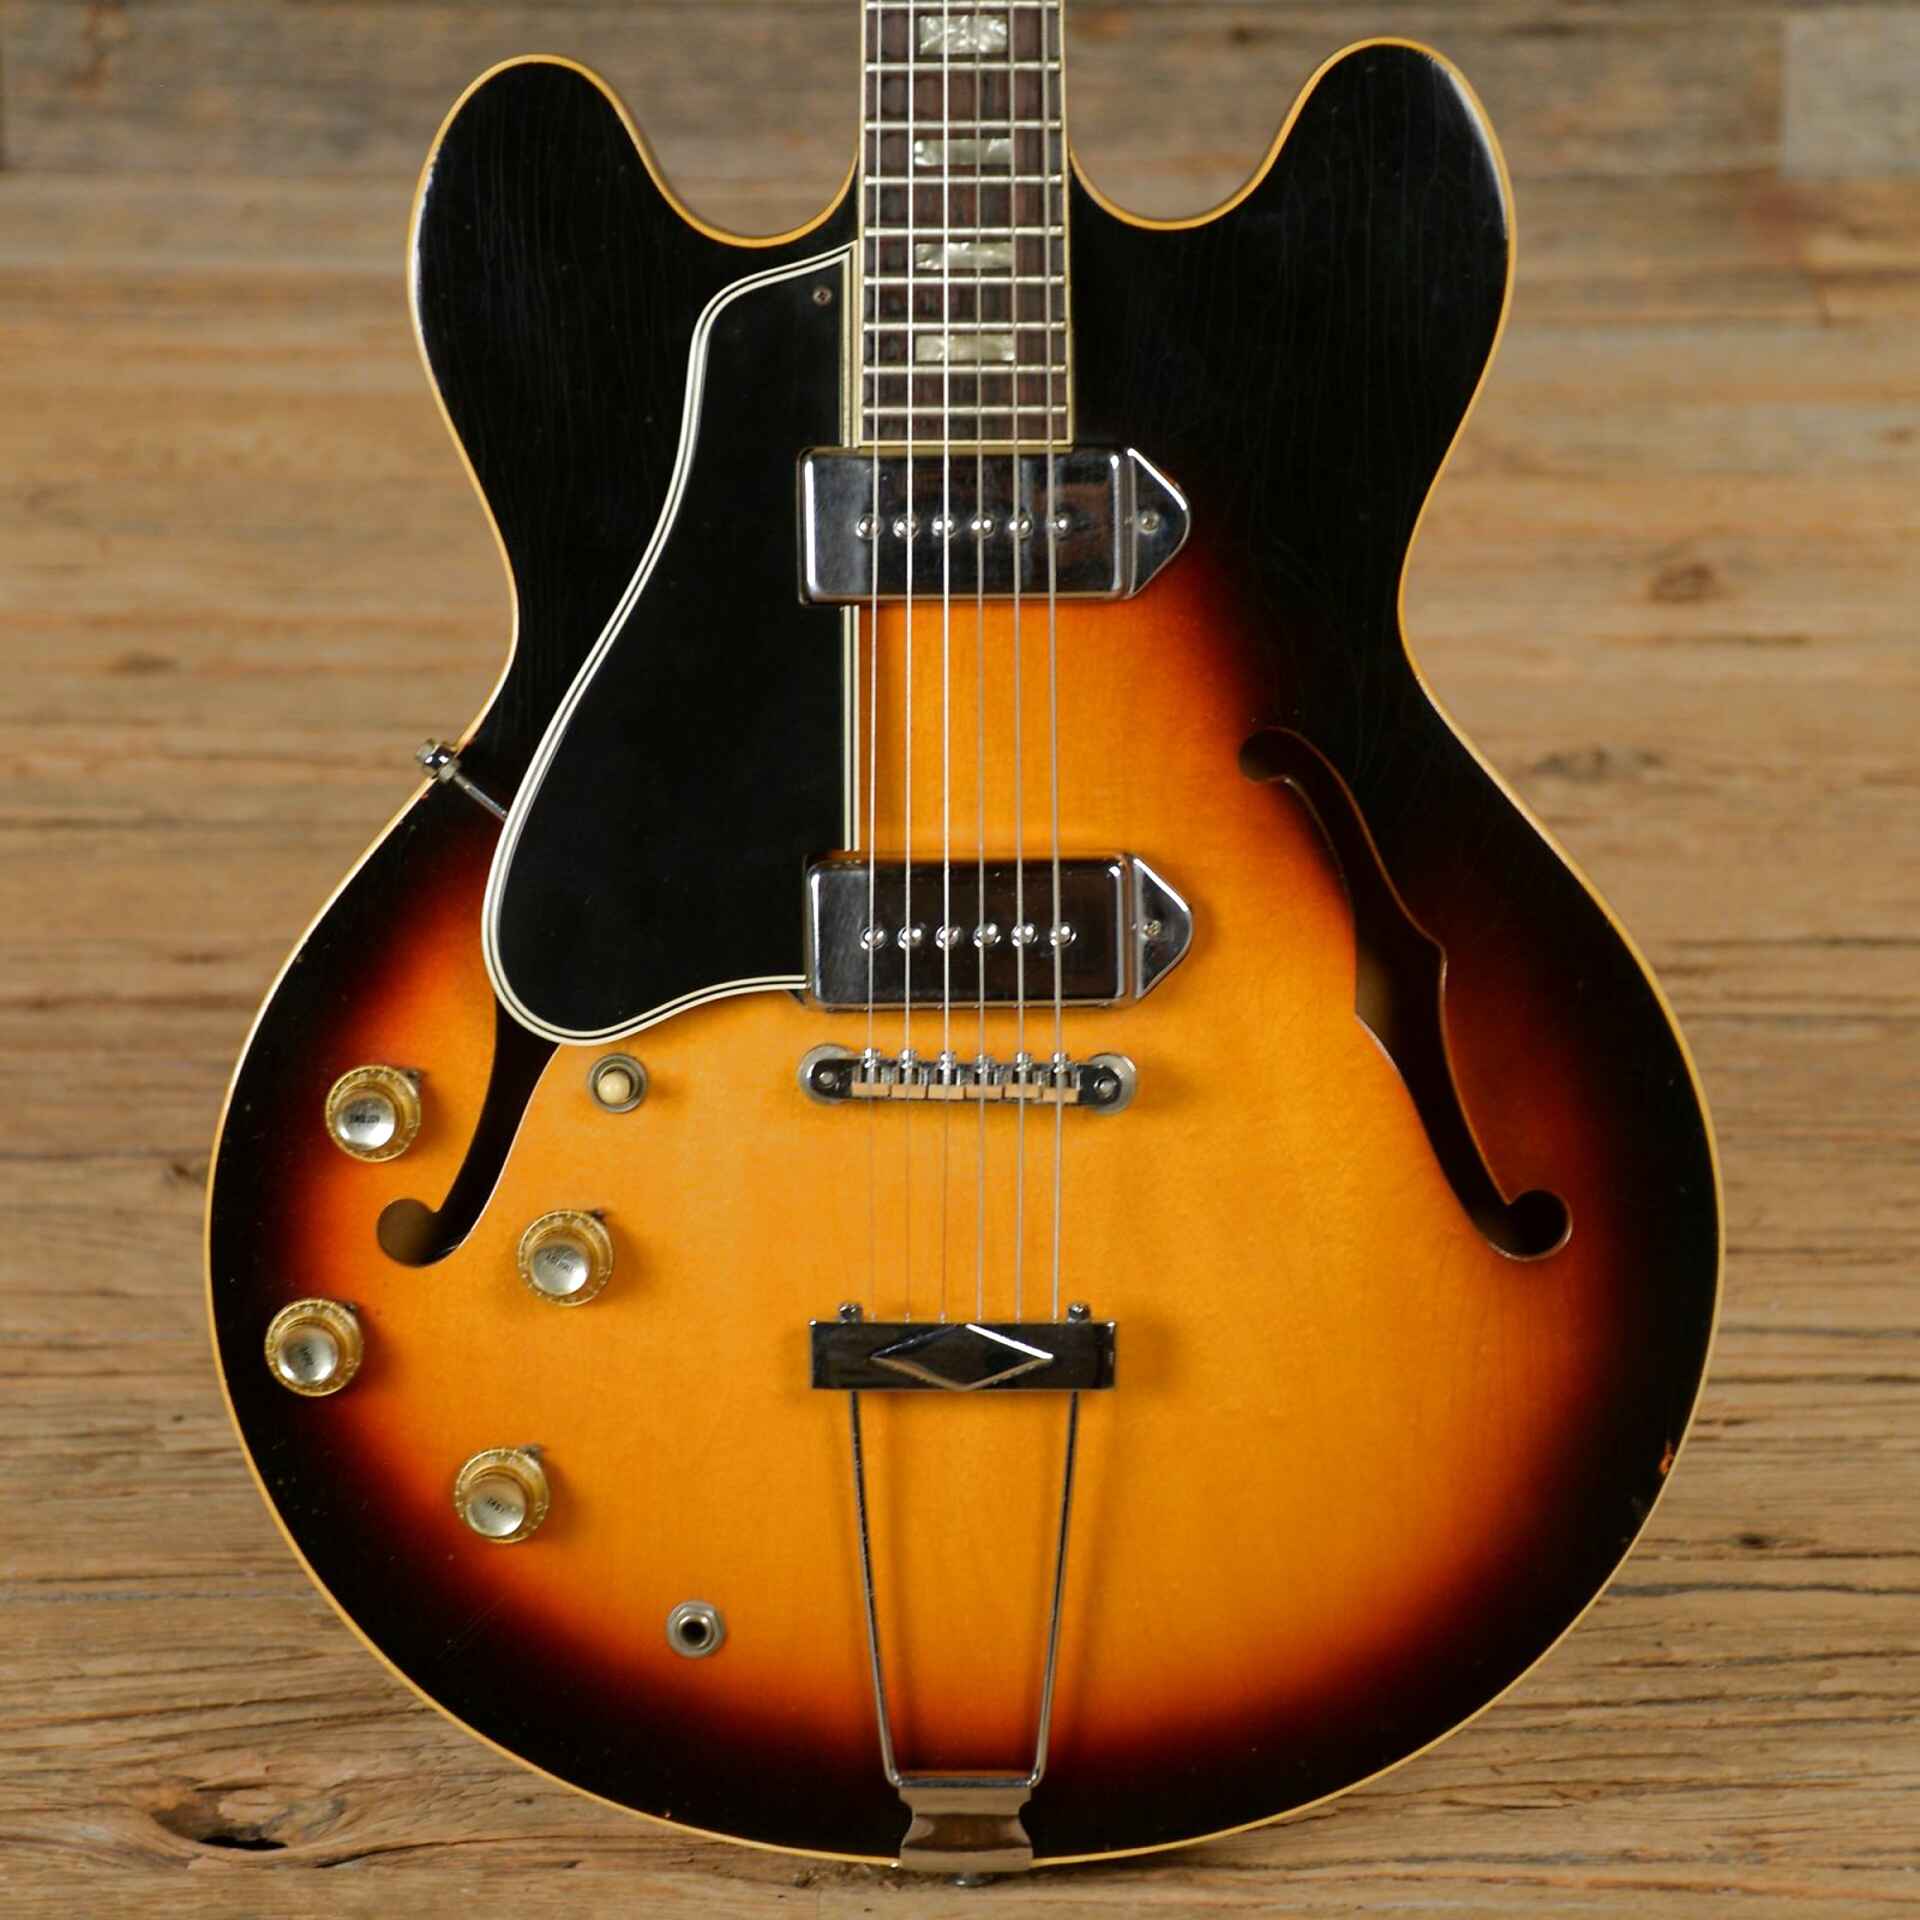 Gibson Es330 Price How do you Price a Switches?